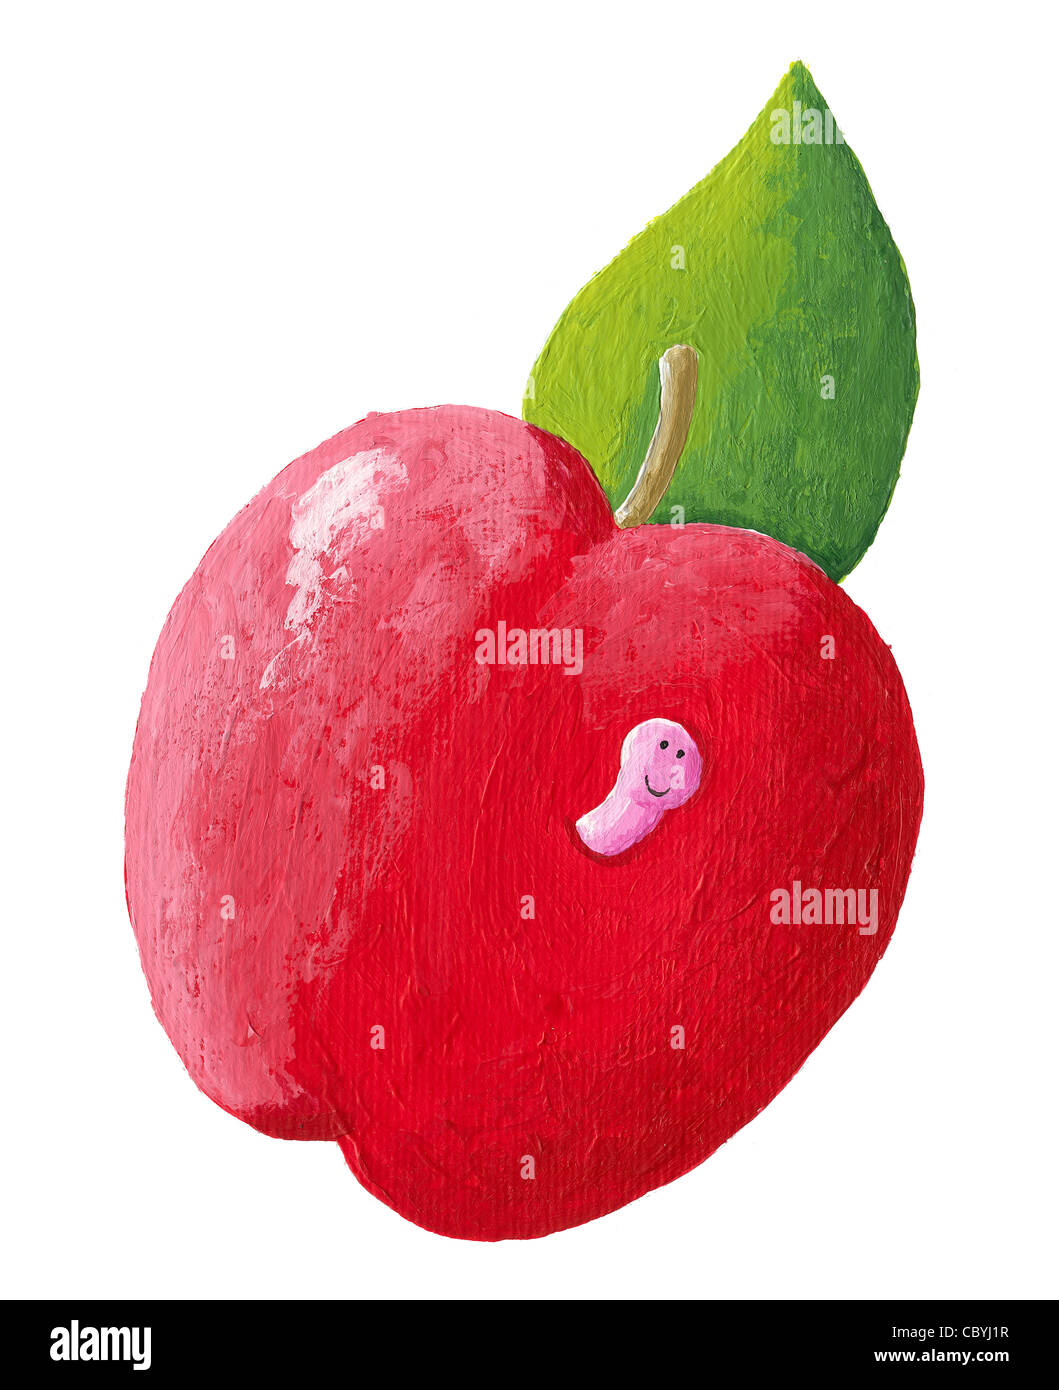 Illustration of red apple with cute pink worm Stock Photo